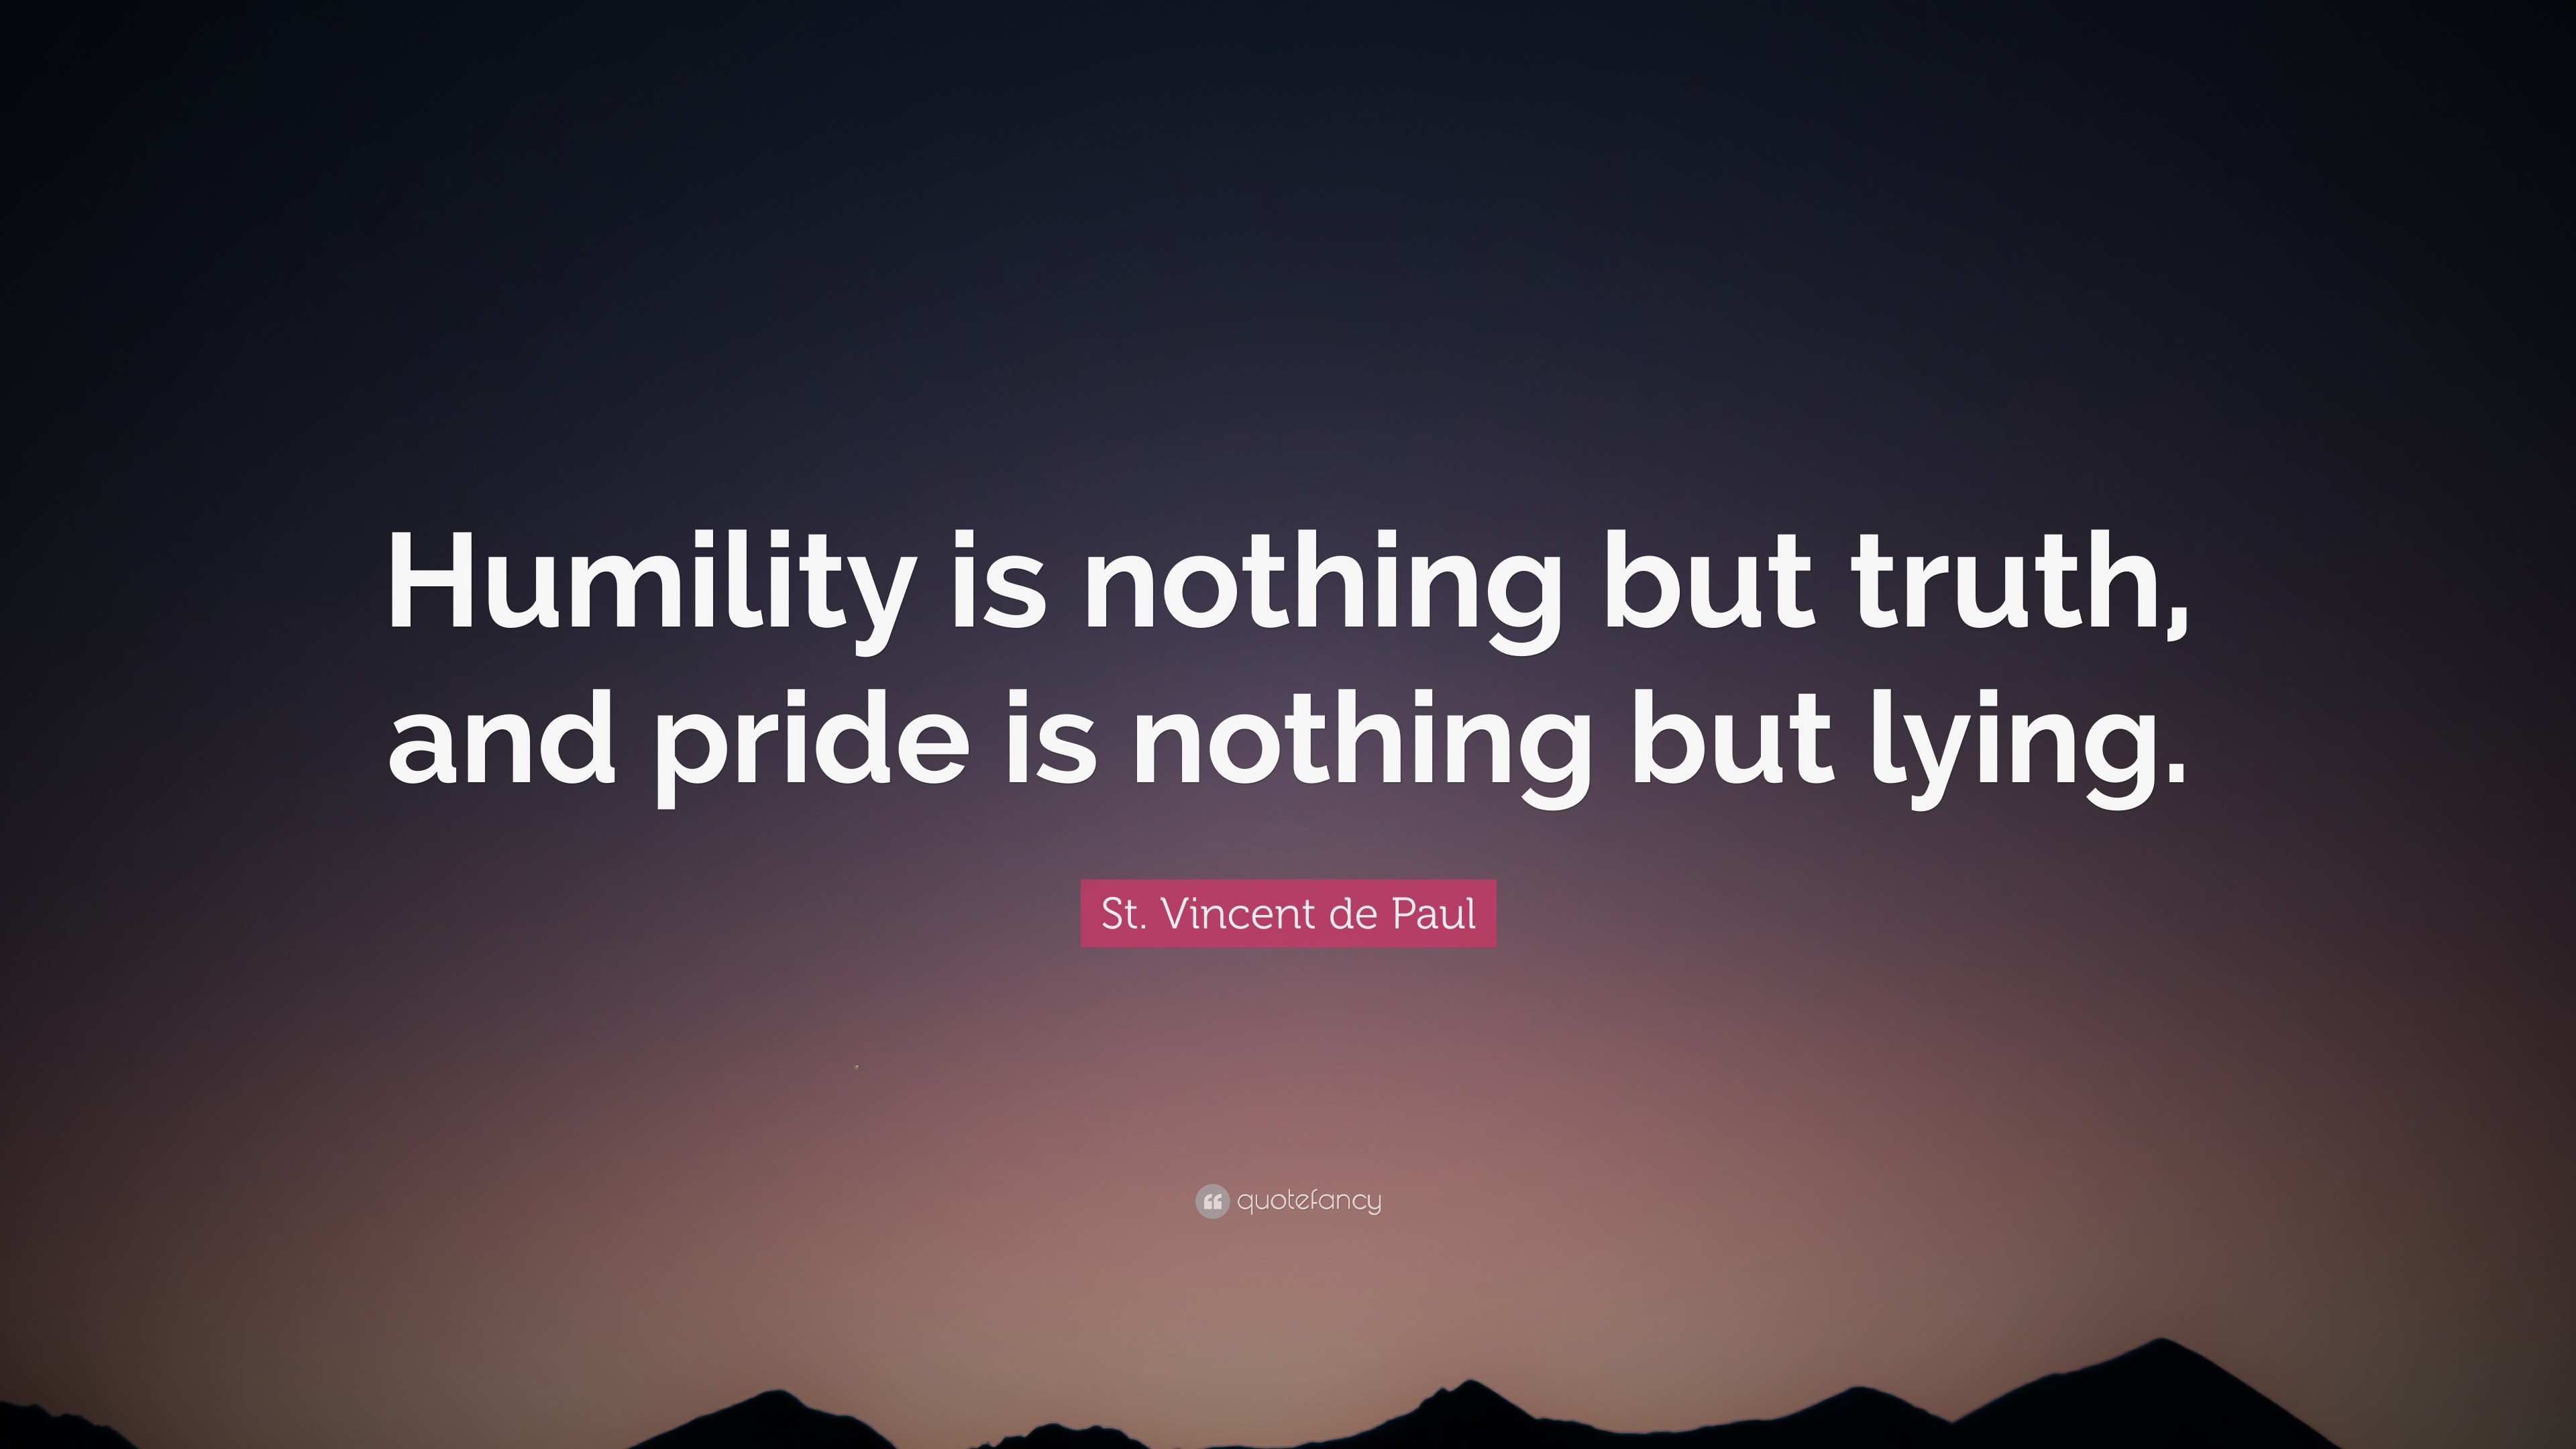 St. Vincent de Paul Quote: “Humility is nothing but truth, and pride is